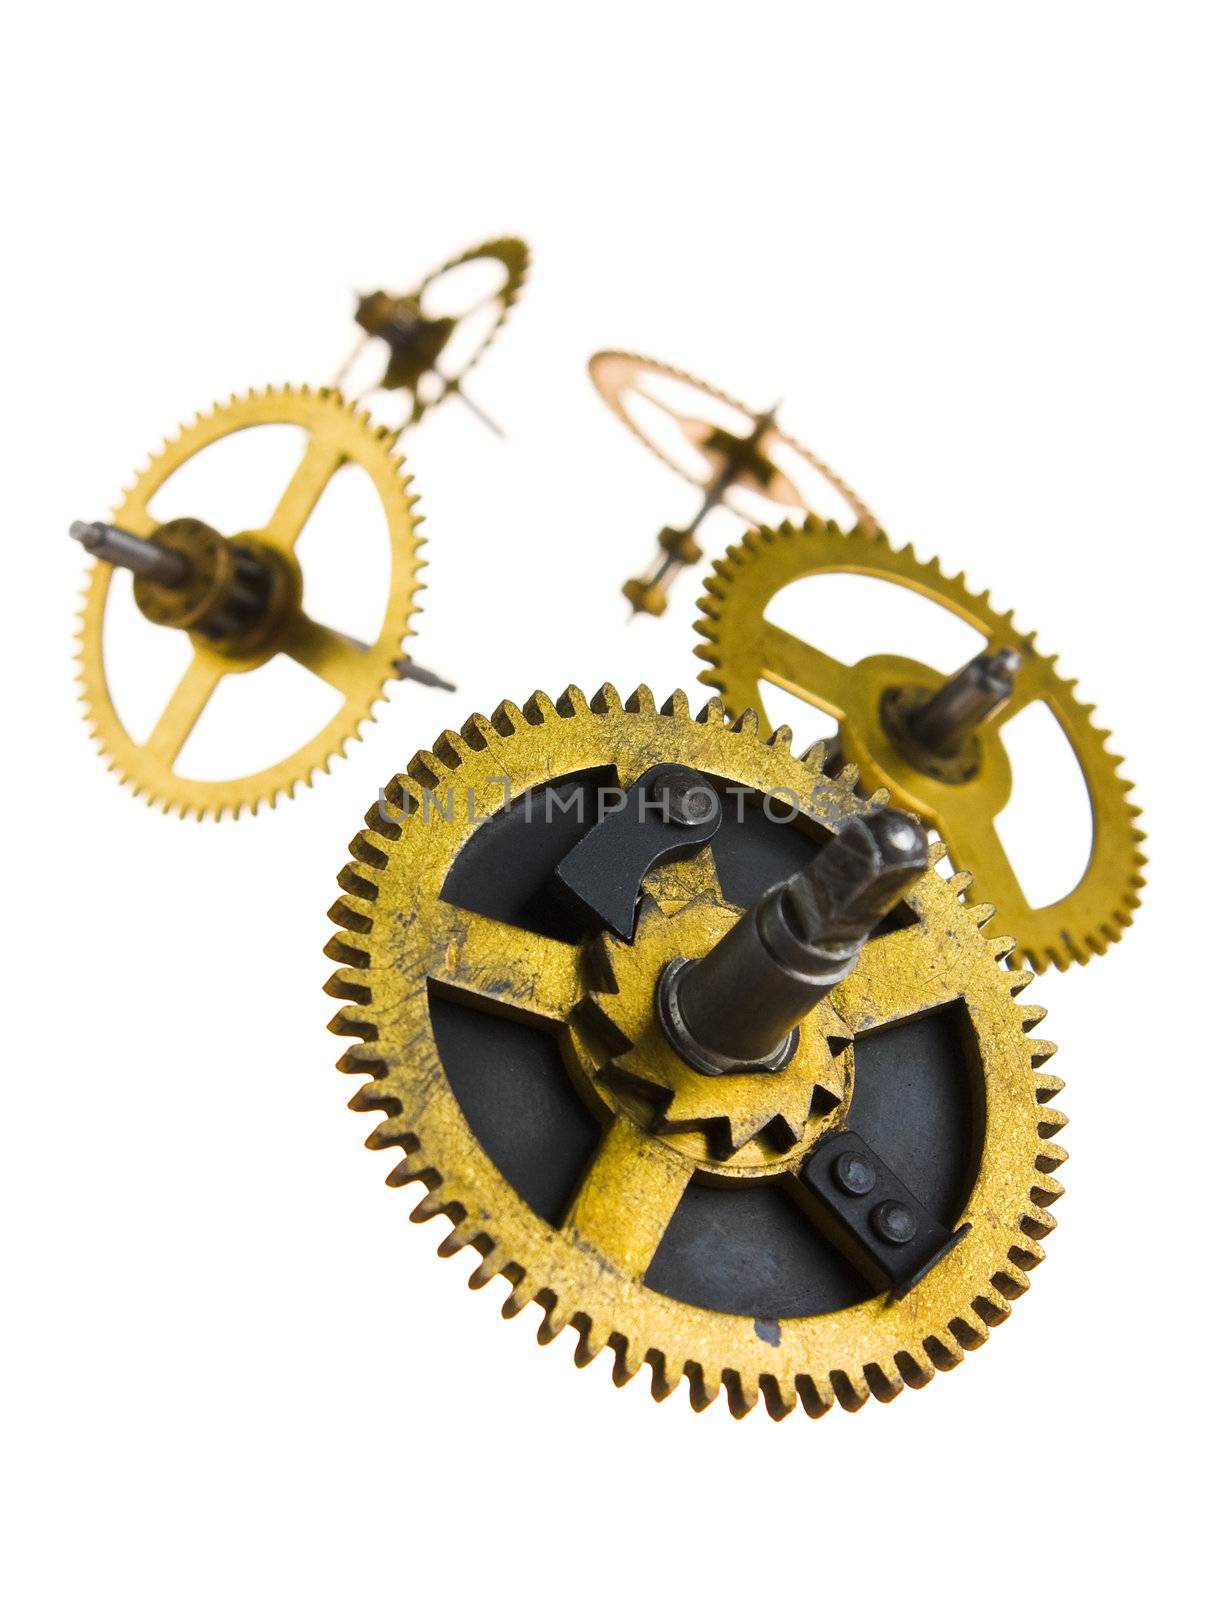 Gear of the clock isolated on white background